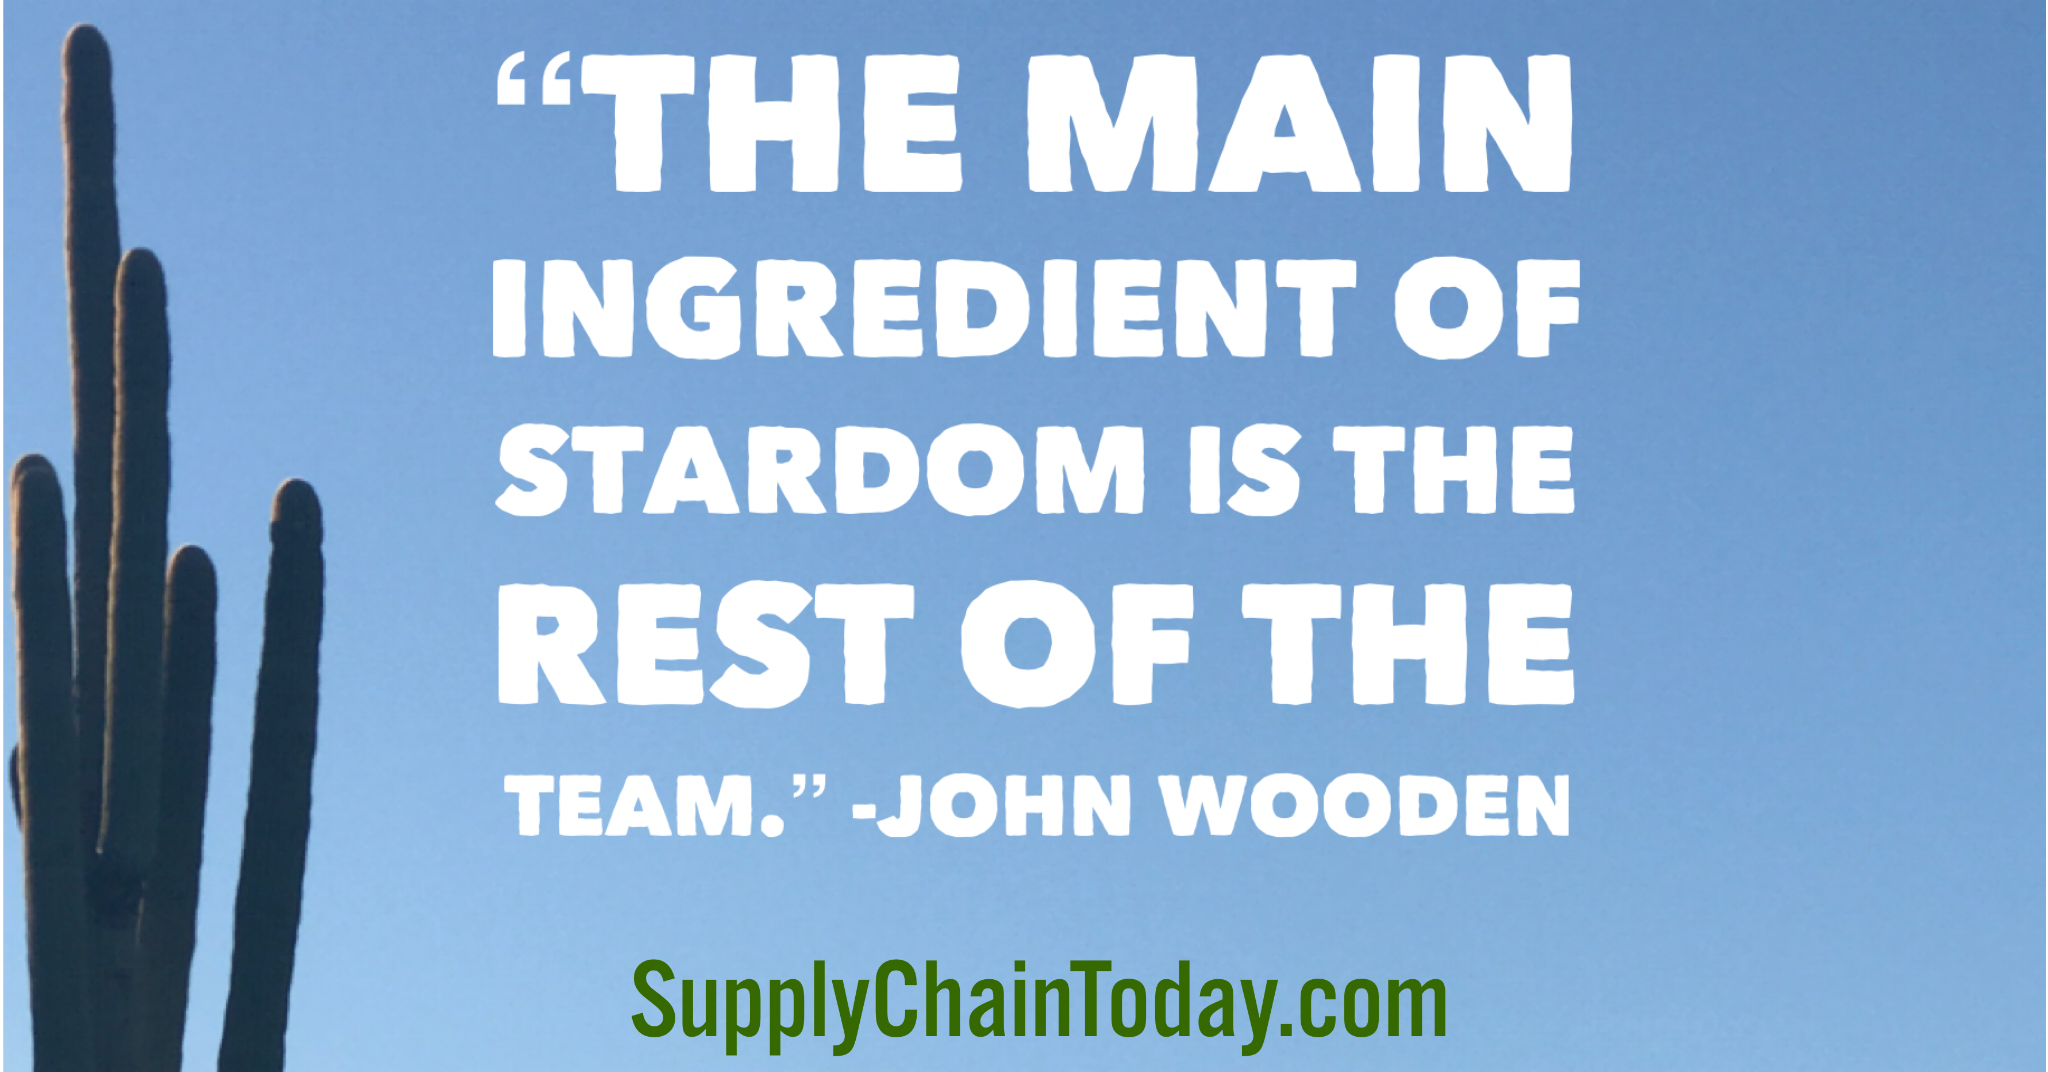 the main ingredient of stardom is the rest of the team. john wooden